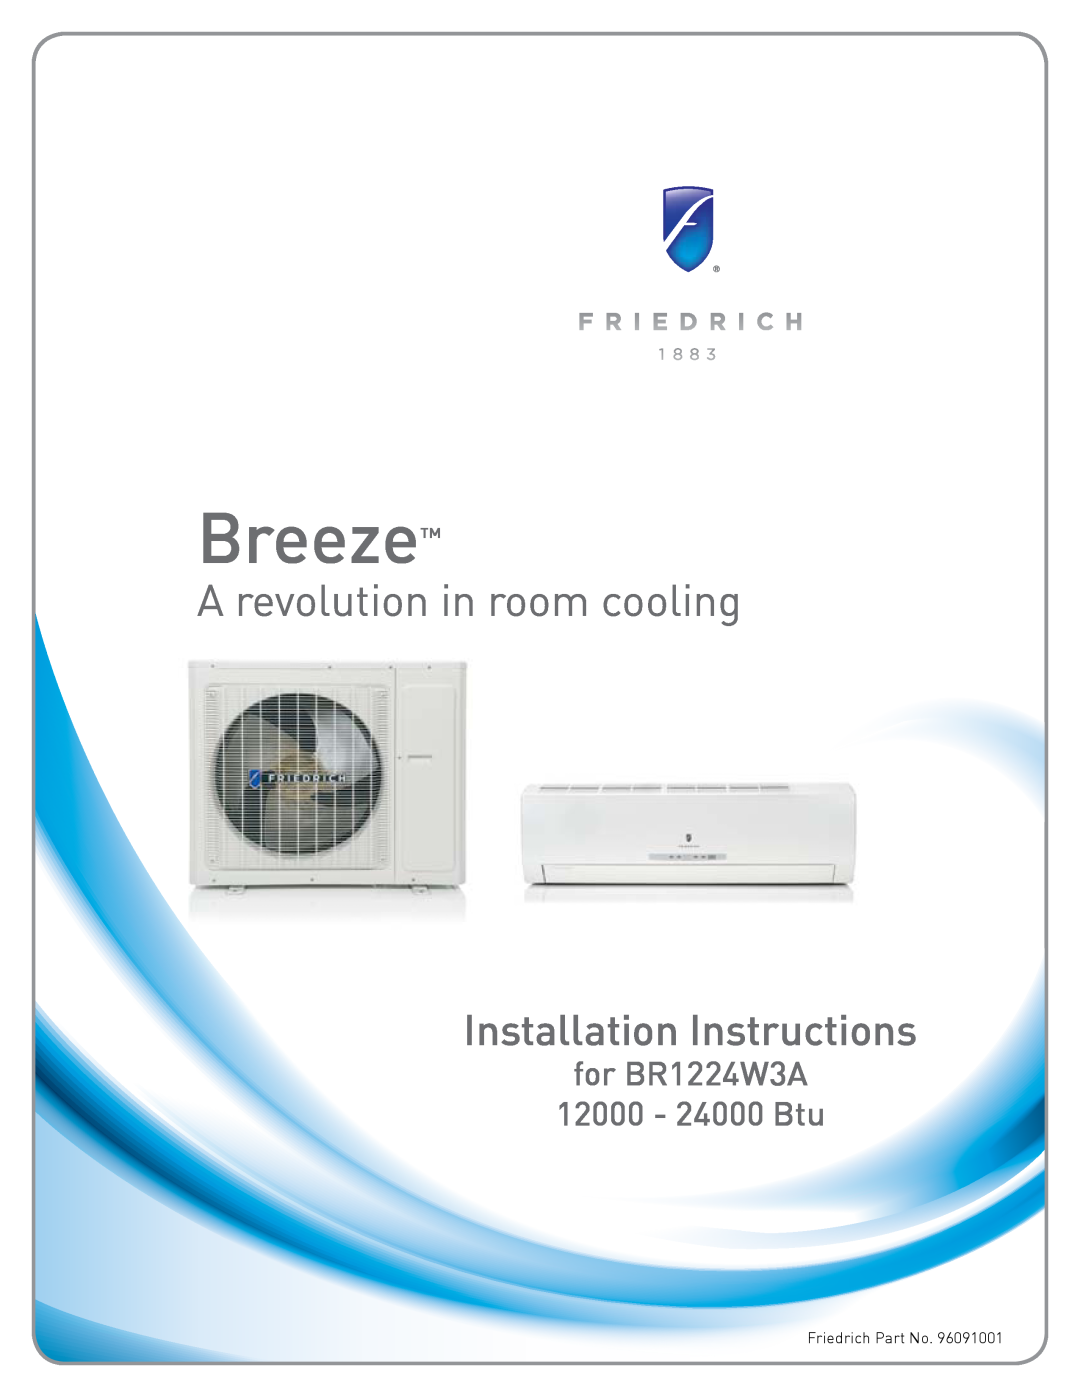 Friedrich BR1224W3A installation instructions Service Questions Contact Friedrich at, Breeze, A revolution in room cooling 